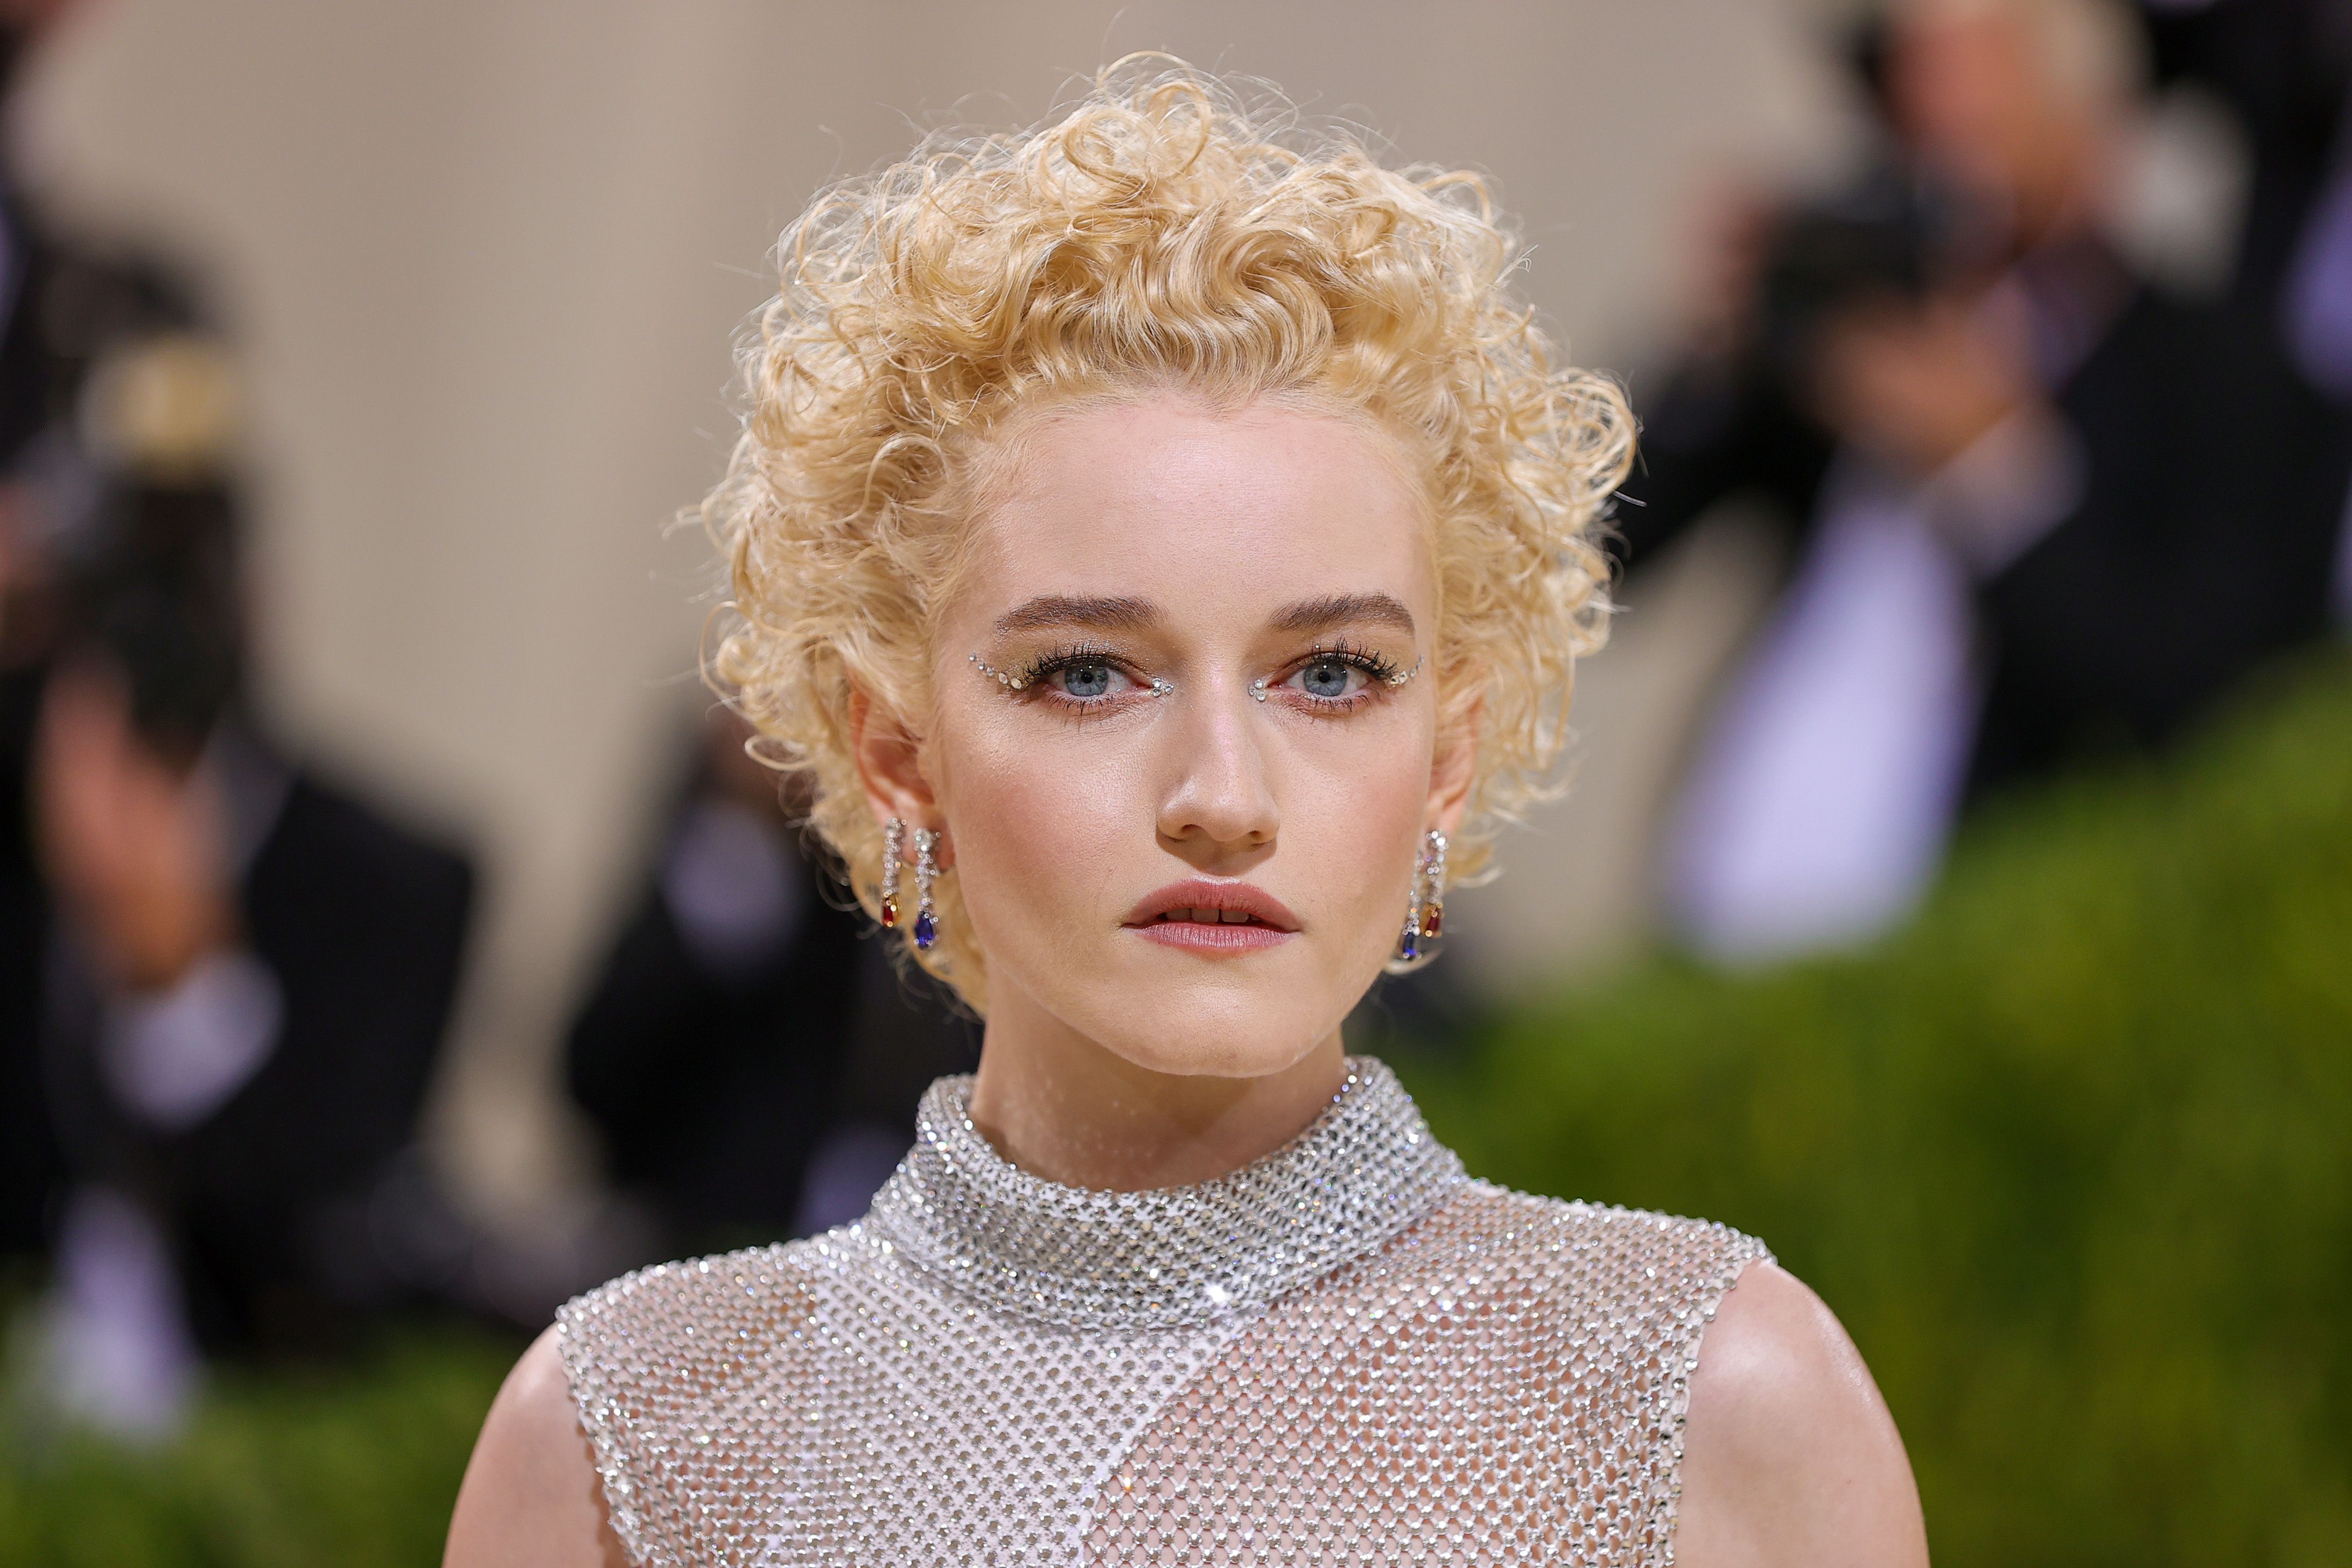  Julia Garner during The 2021 Met Gala Celebrating In America: A Lexicon Of Fashion at Metropolitan Museum of Art on September 13, 2021, in New York City. | Source: Getty Images